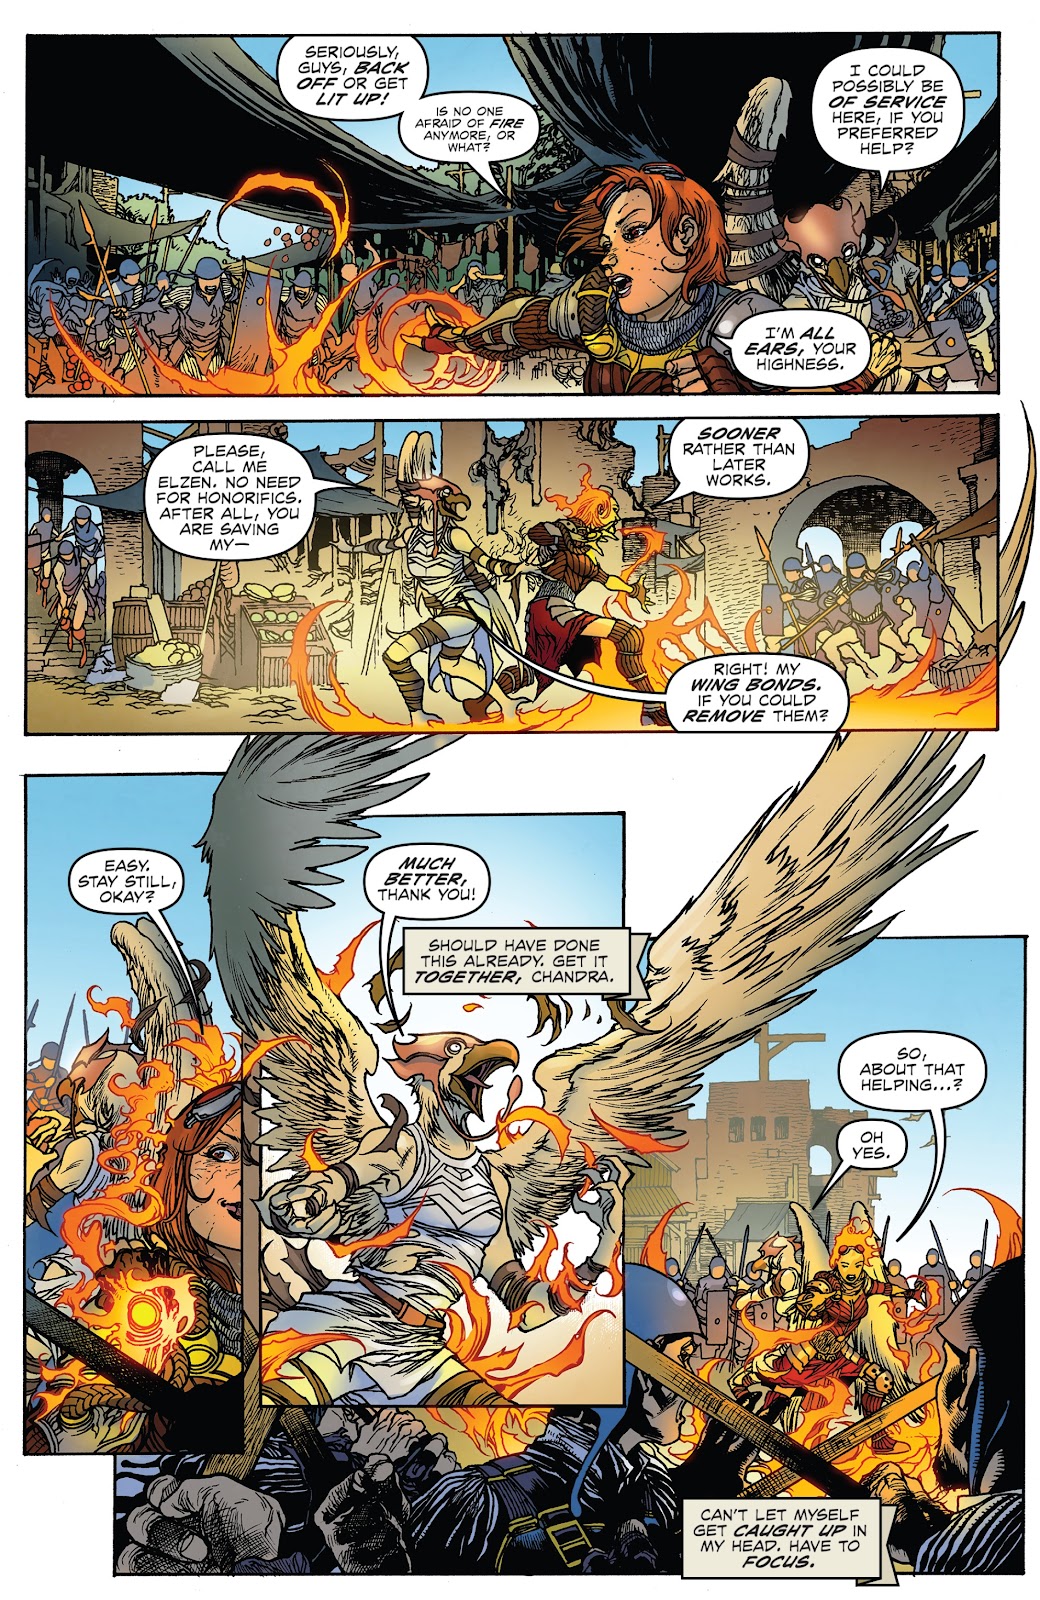 Magic: The Gathering: Chandra issue 2 - Page 9